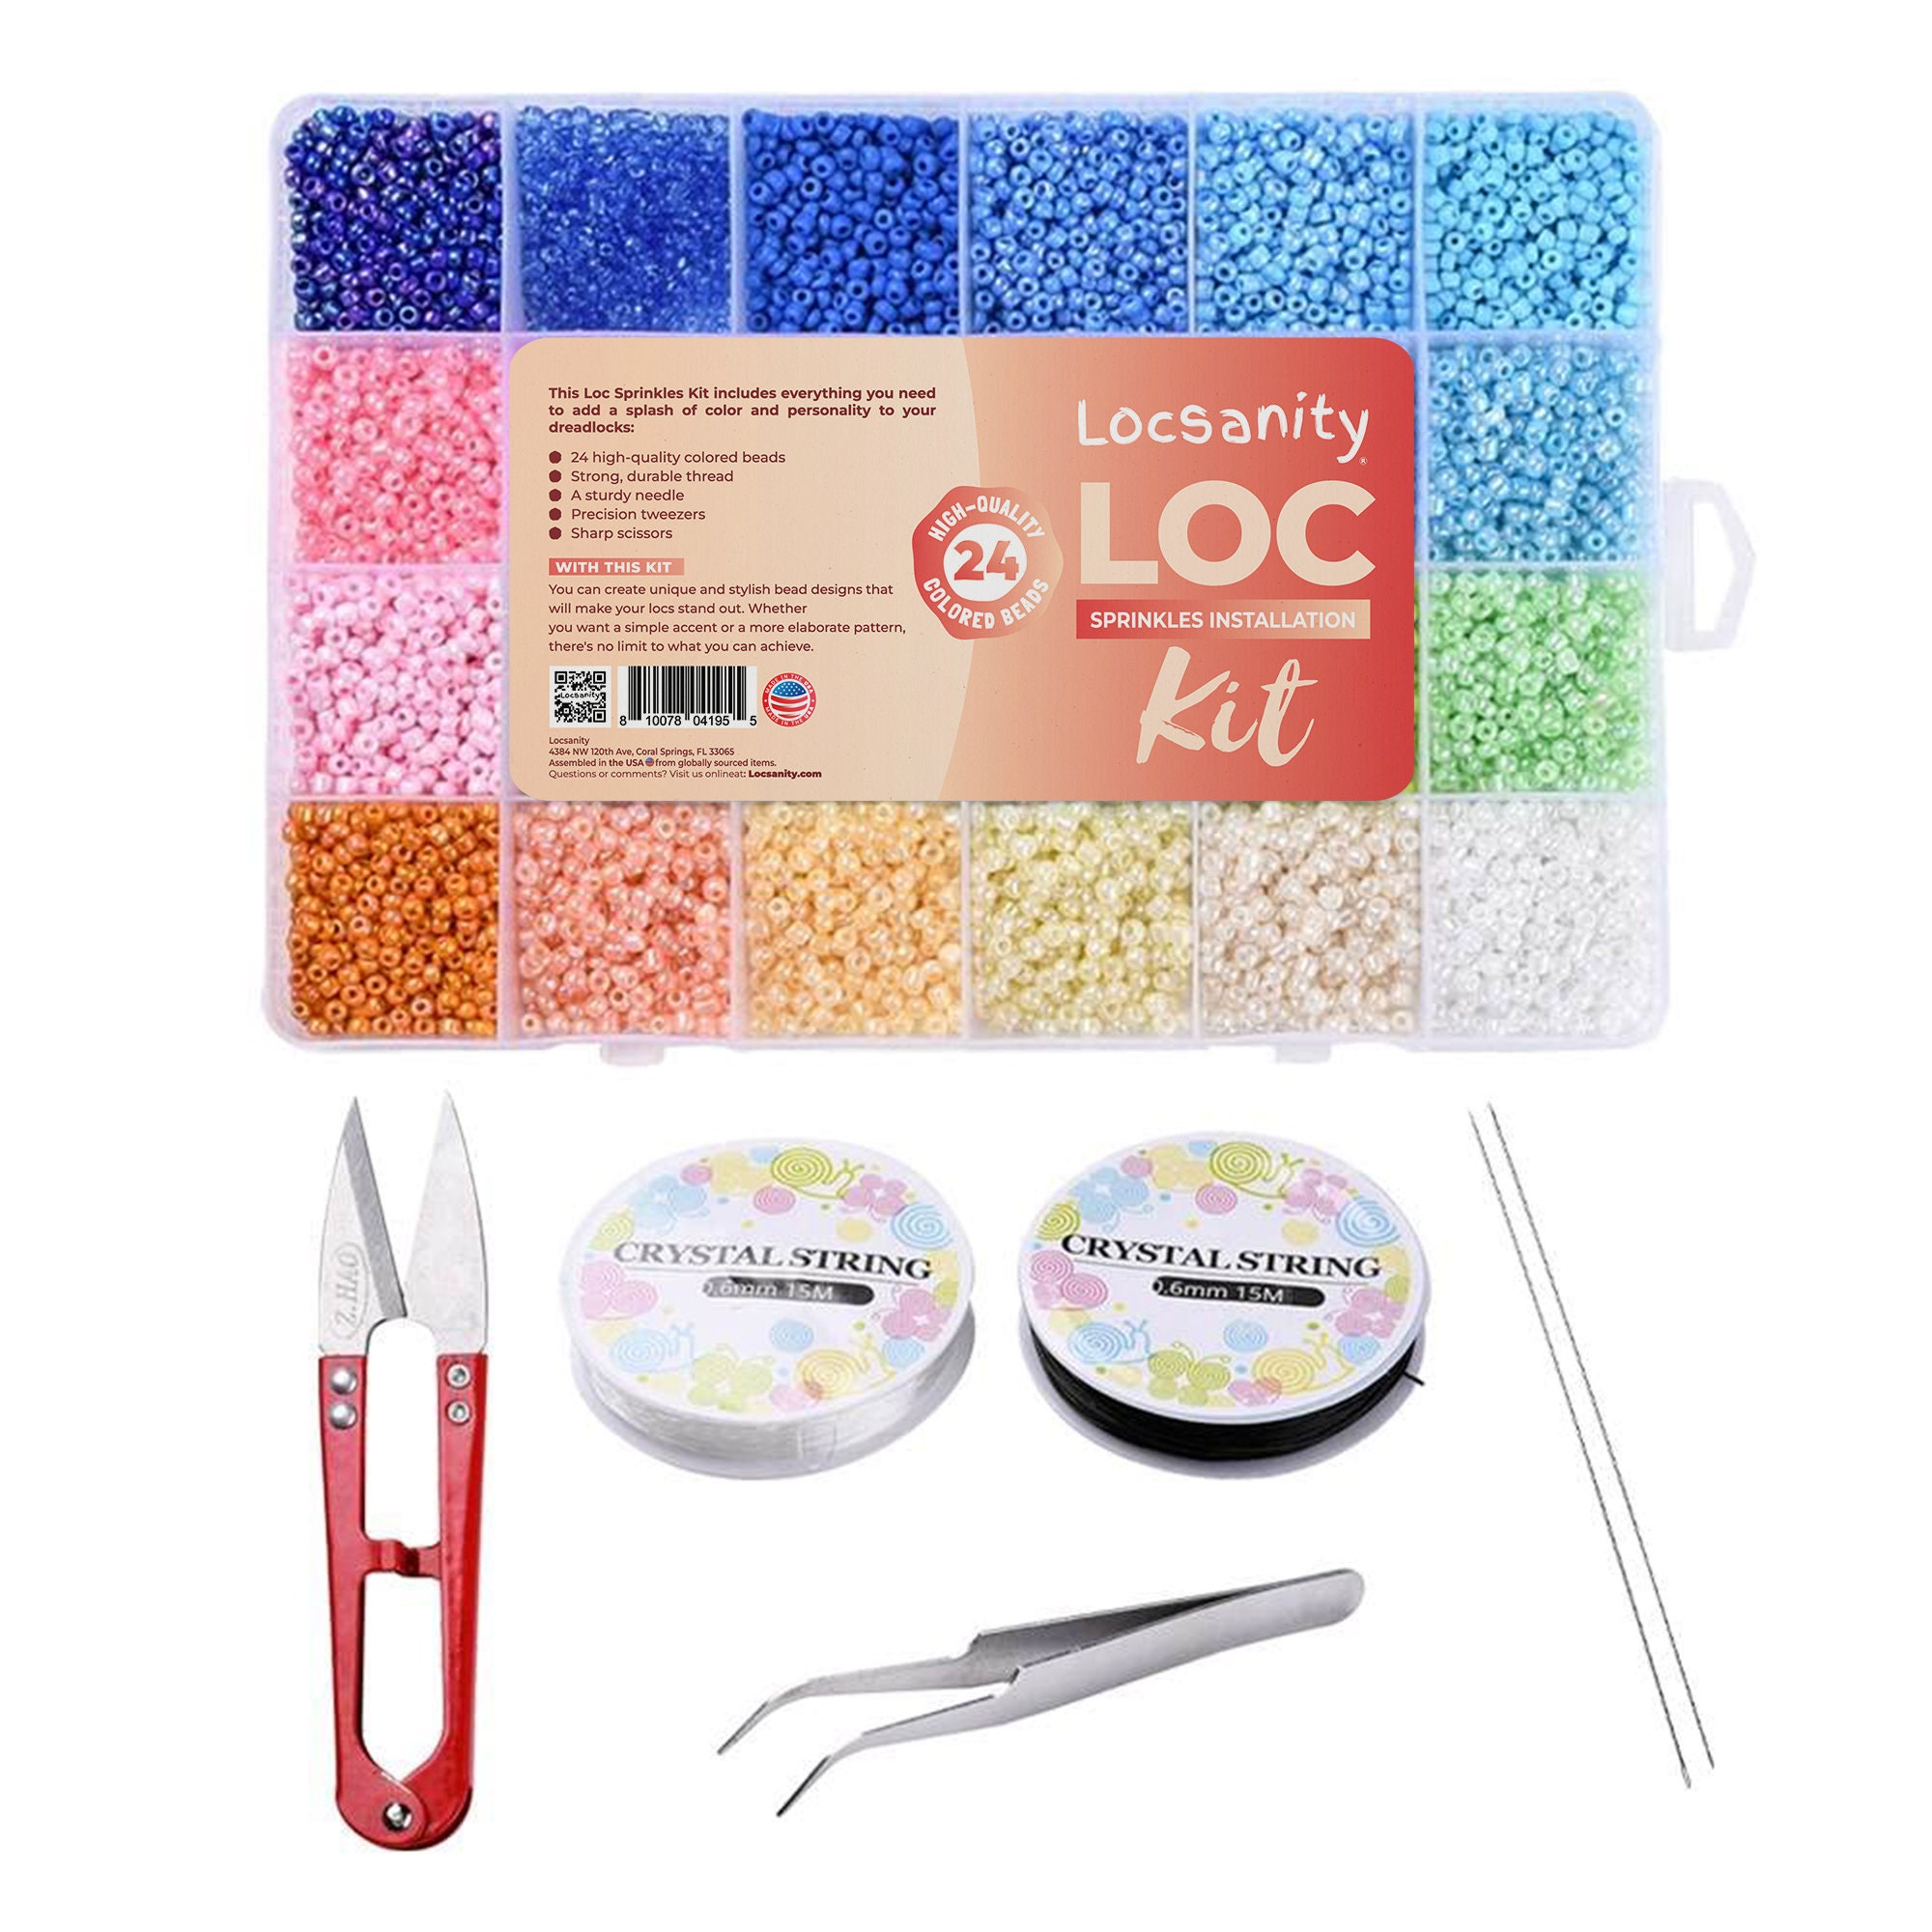 Install these loc sprinkles with me! . . . Like and comment if you